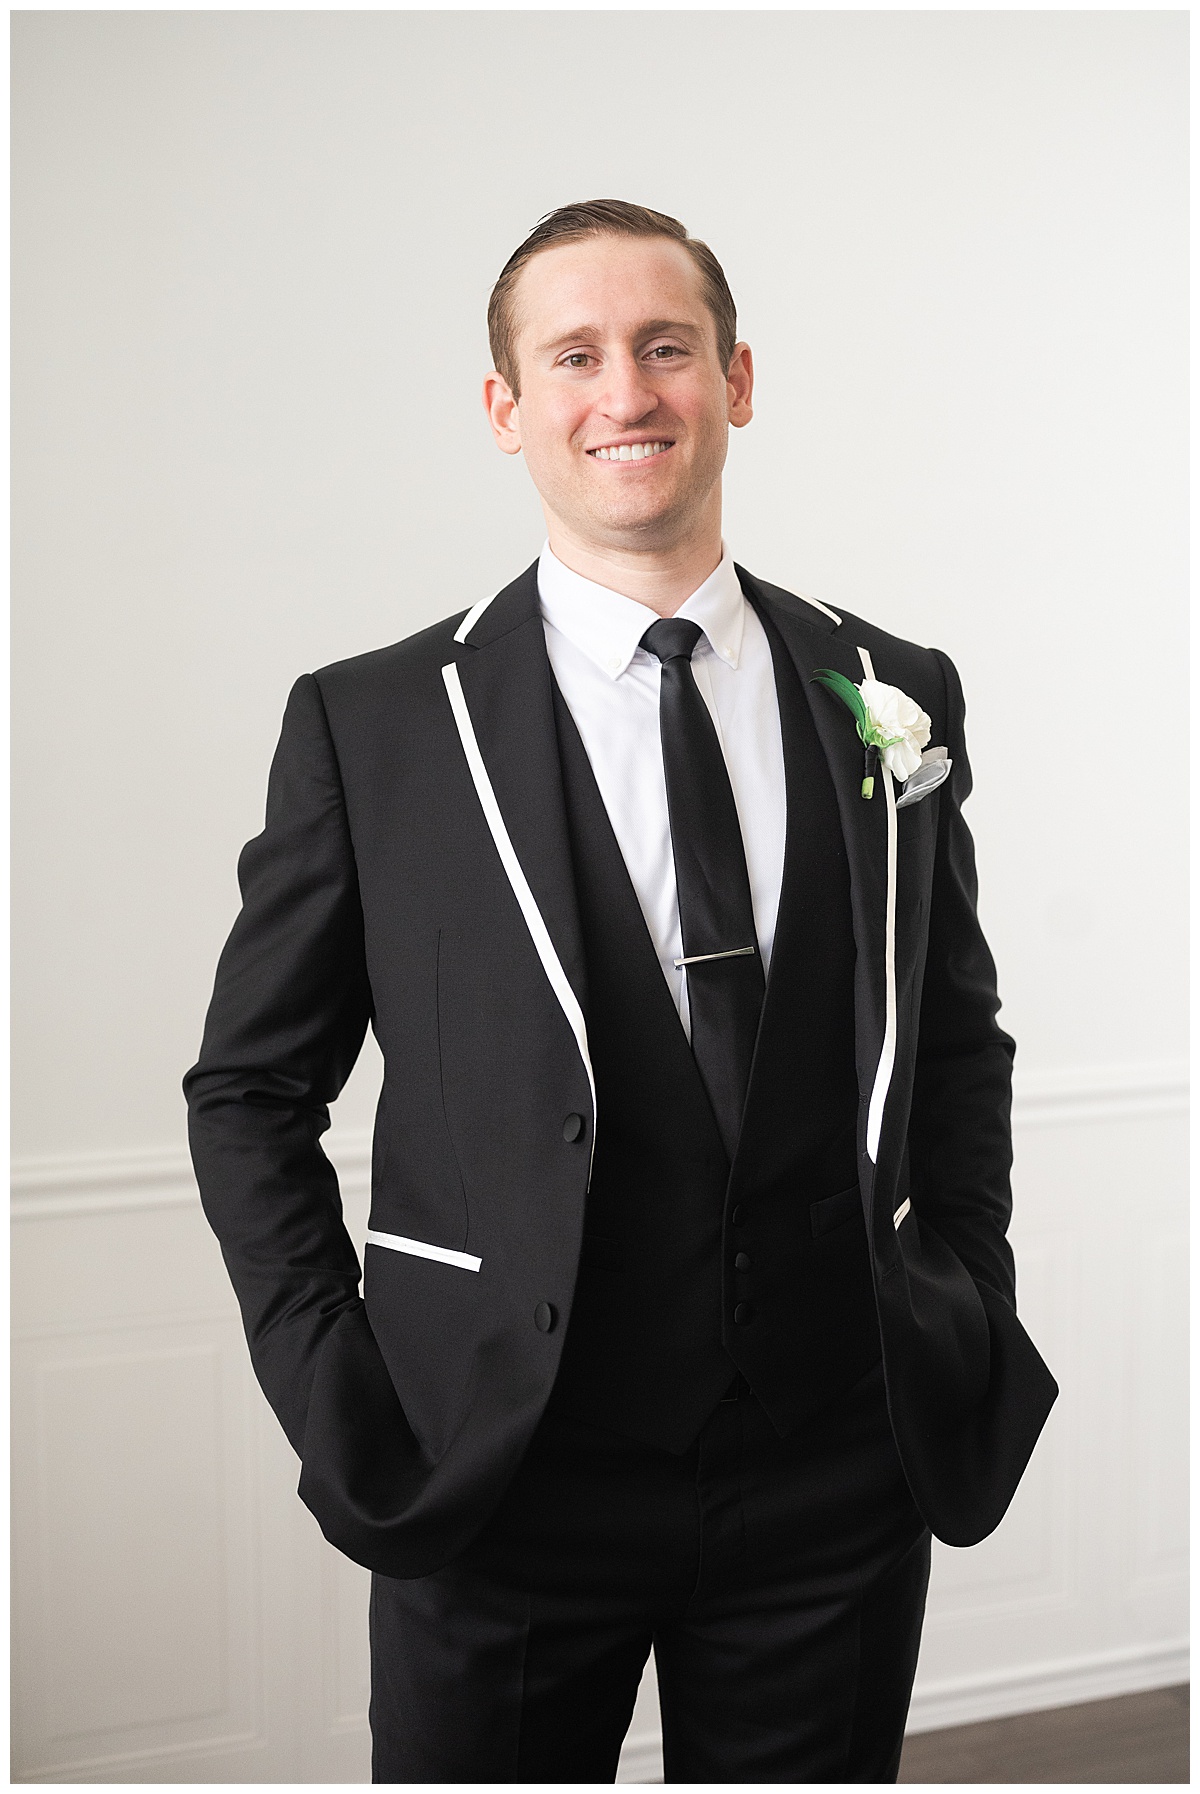 Groom gets ready for wedding for Swish & Click Photography